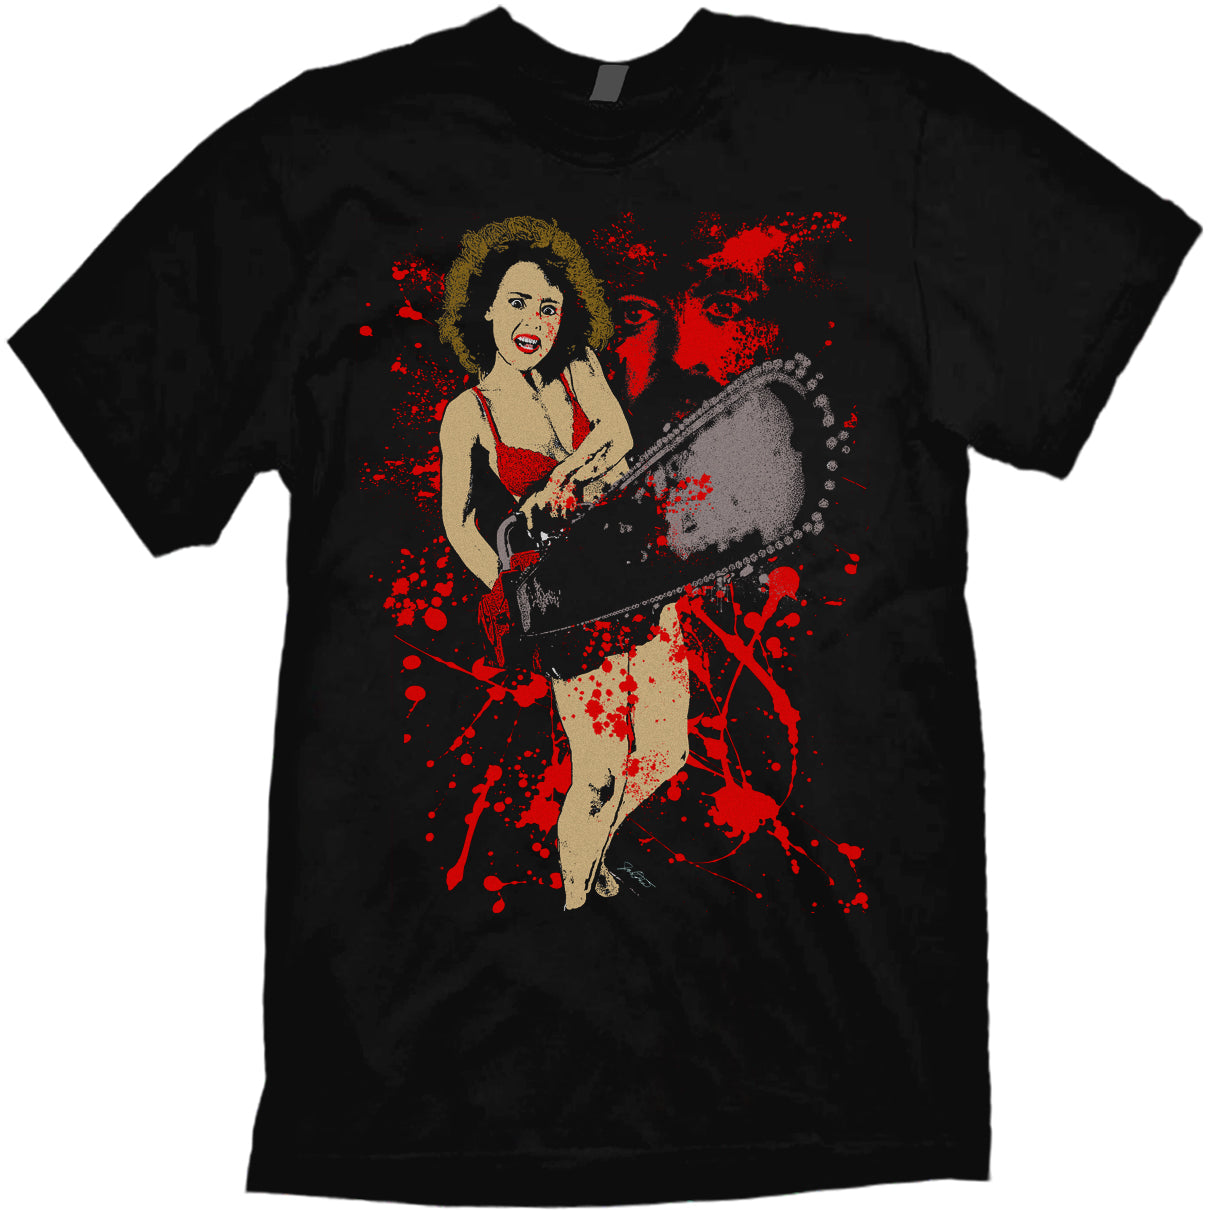 Hollywood Chainsaw Hookers T-shirt VHS Classics Series